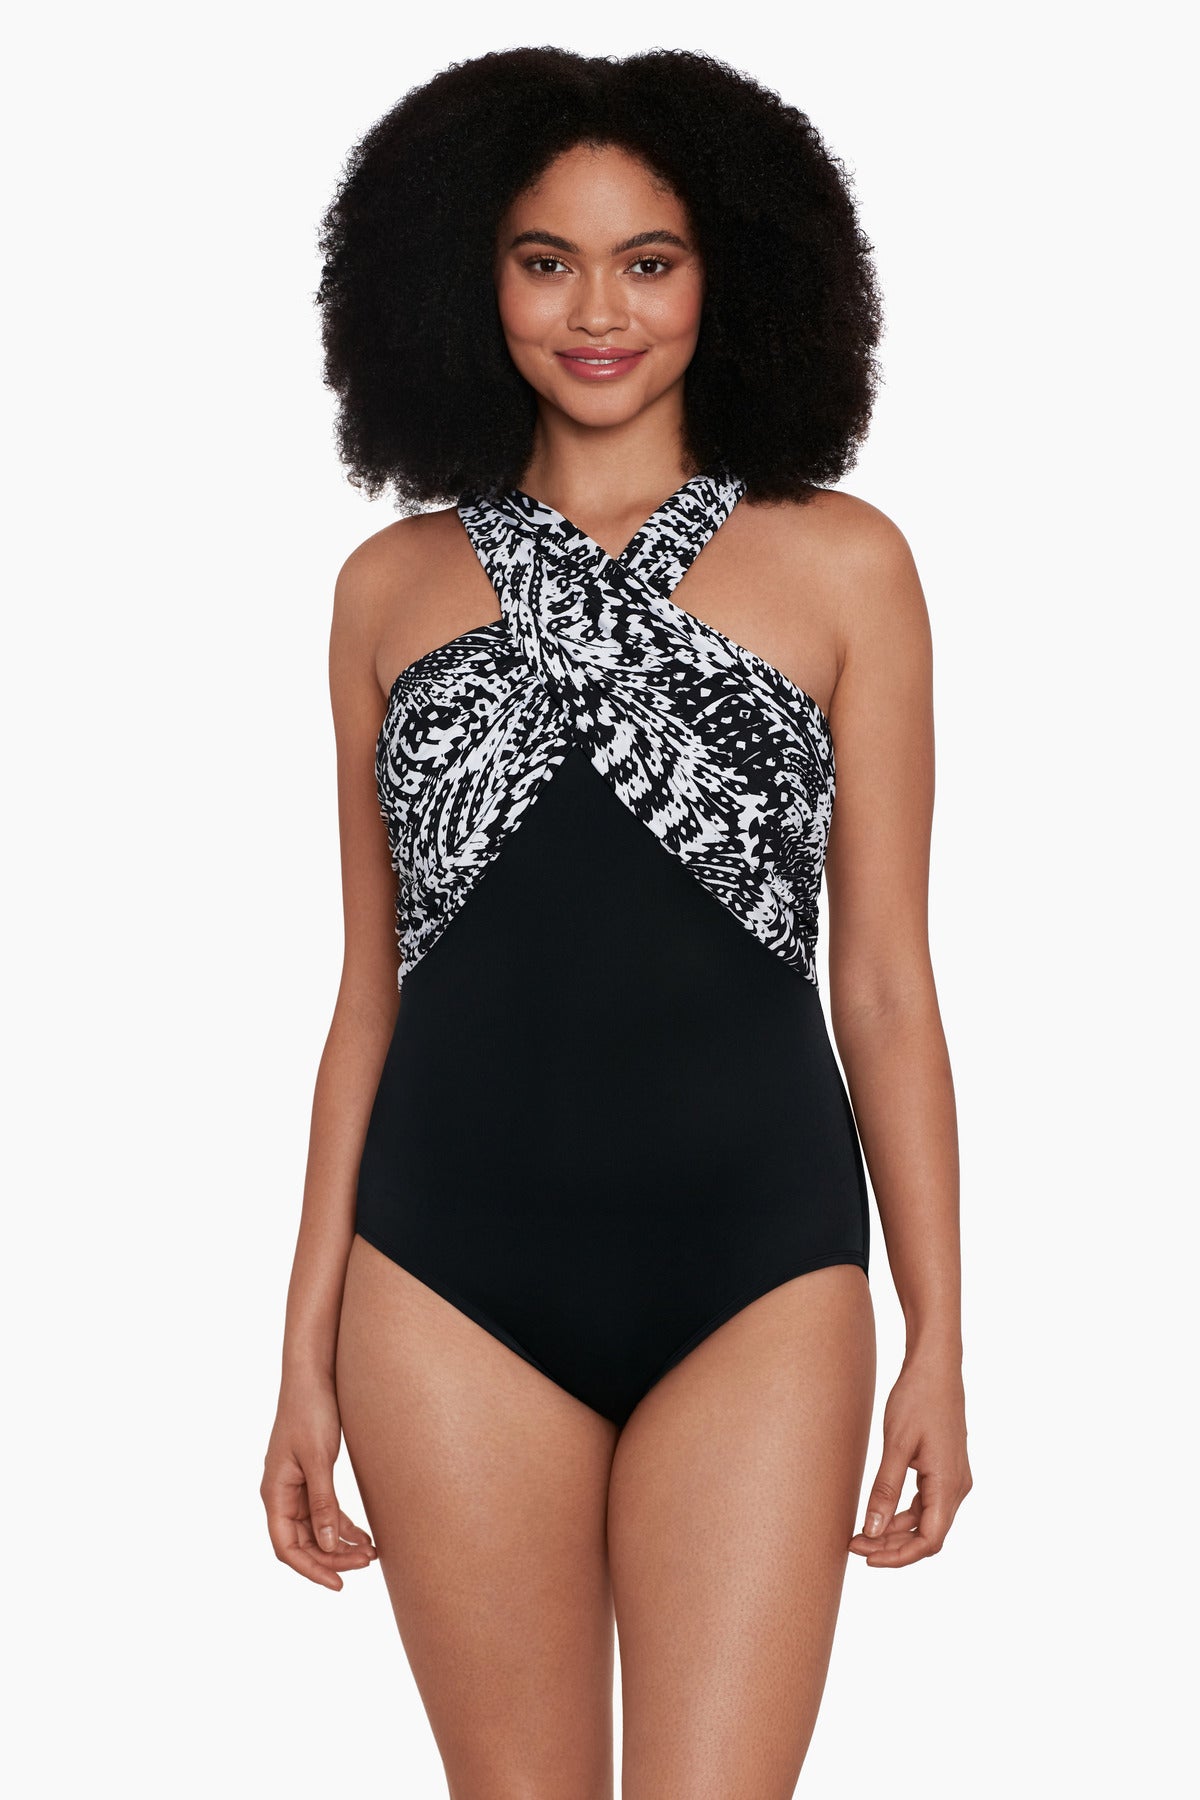 Scoopback Highneck Long Torso Panel Swimsuit Ombre Mood